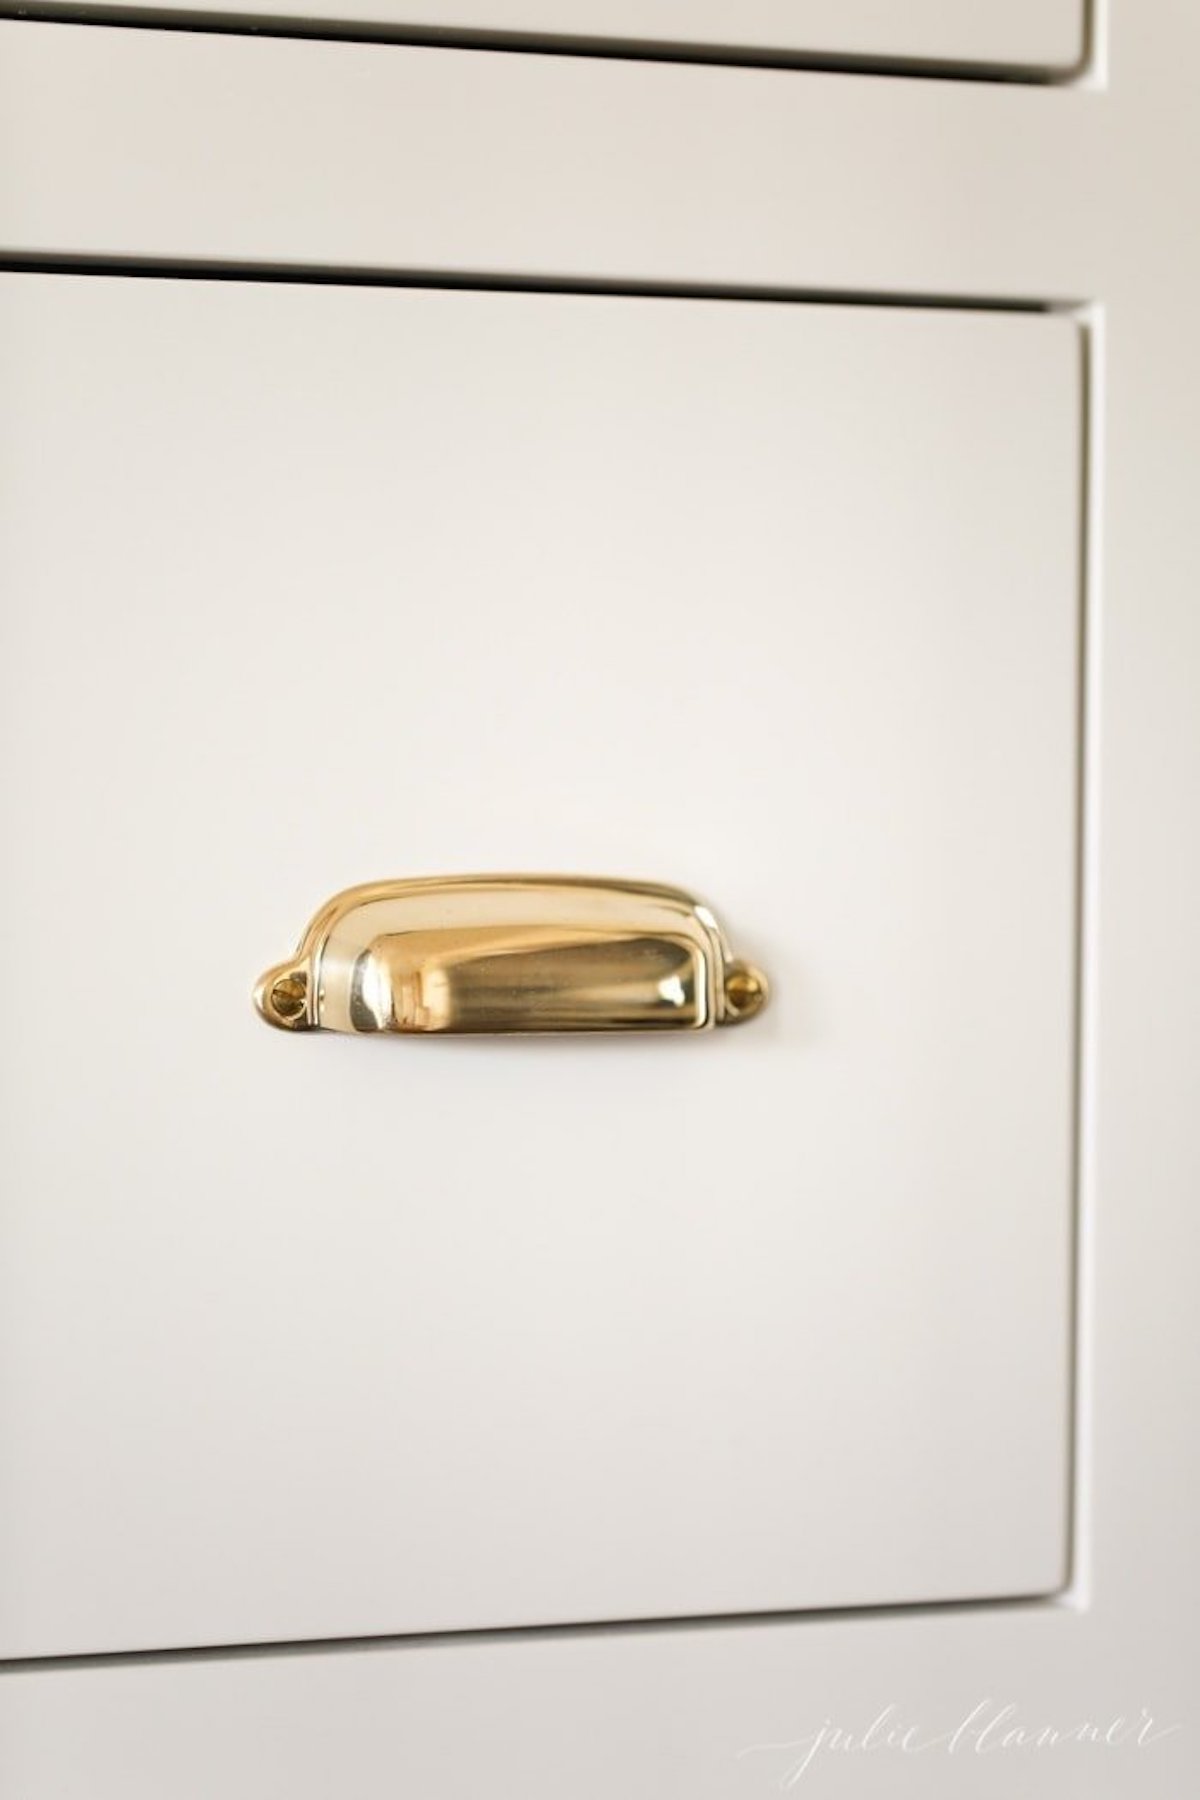 A close up of a gold handle on a white cabinet with shaker cabinet knob placement.